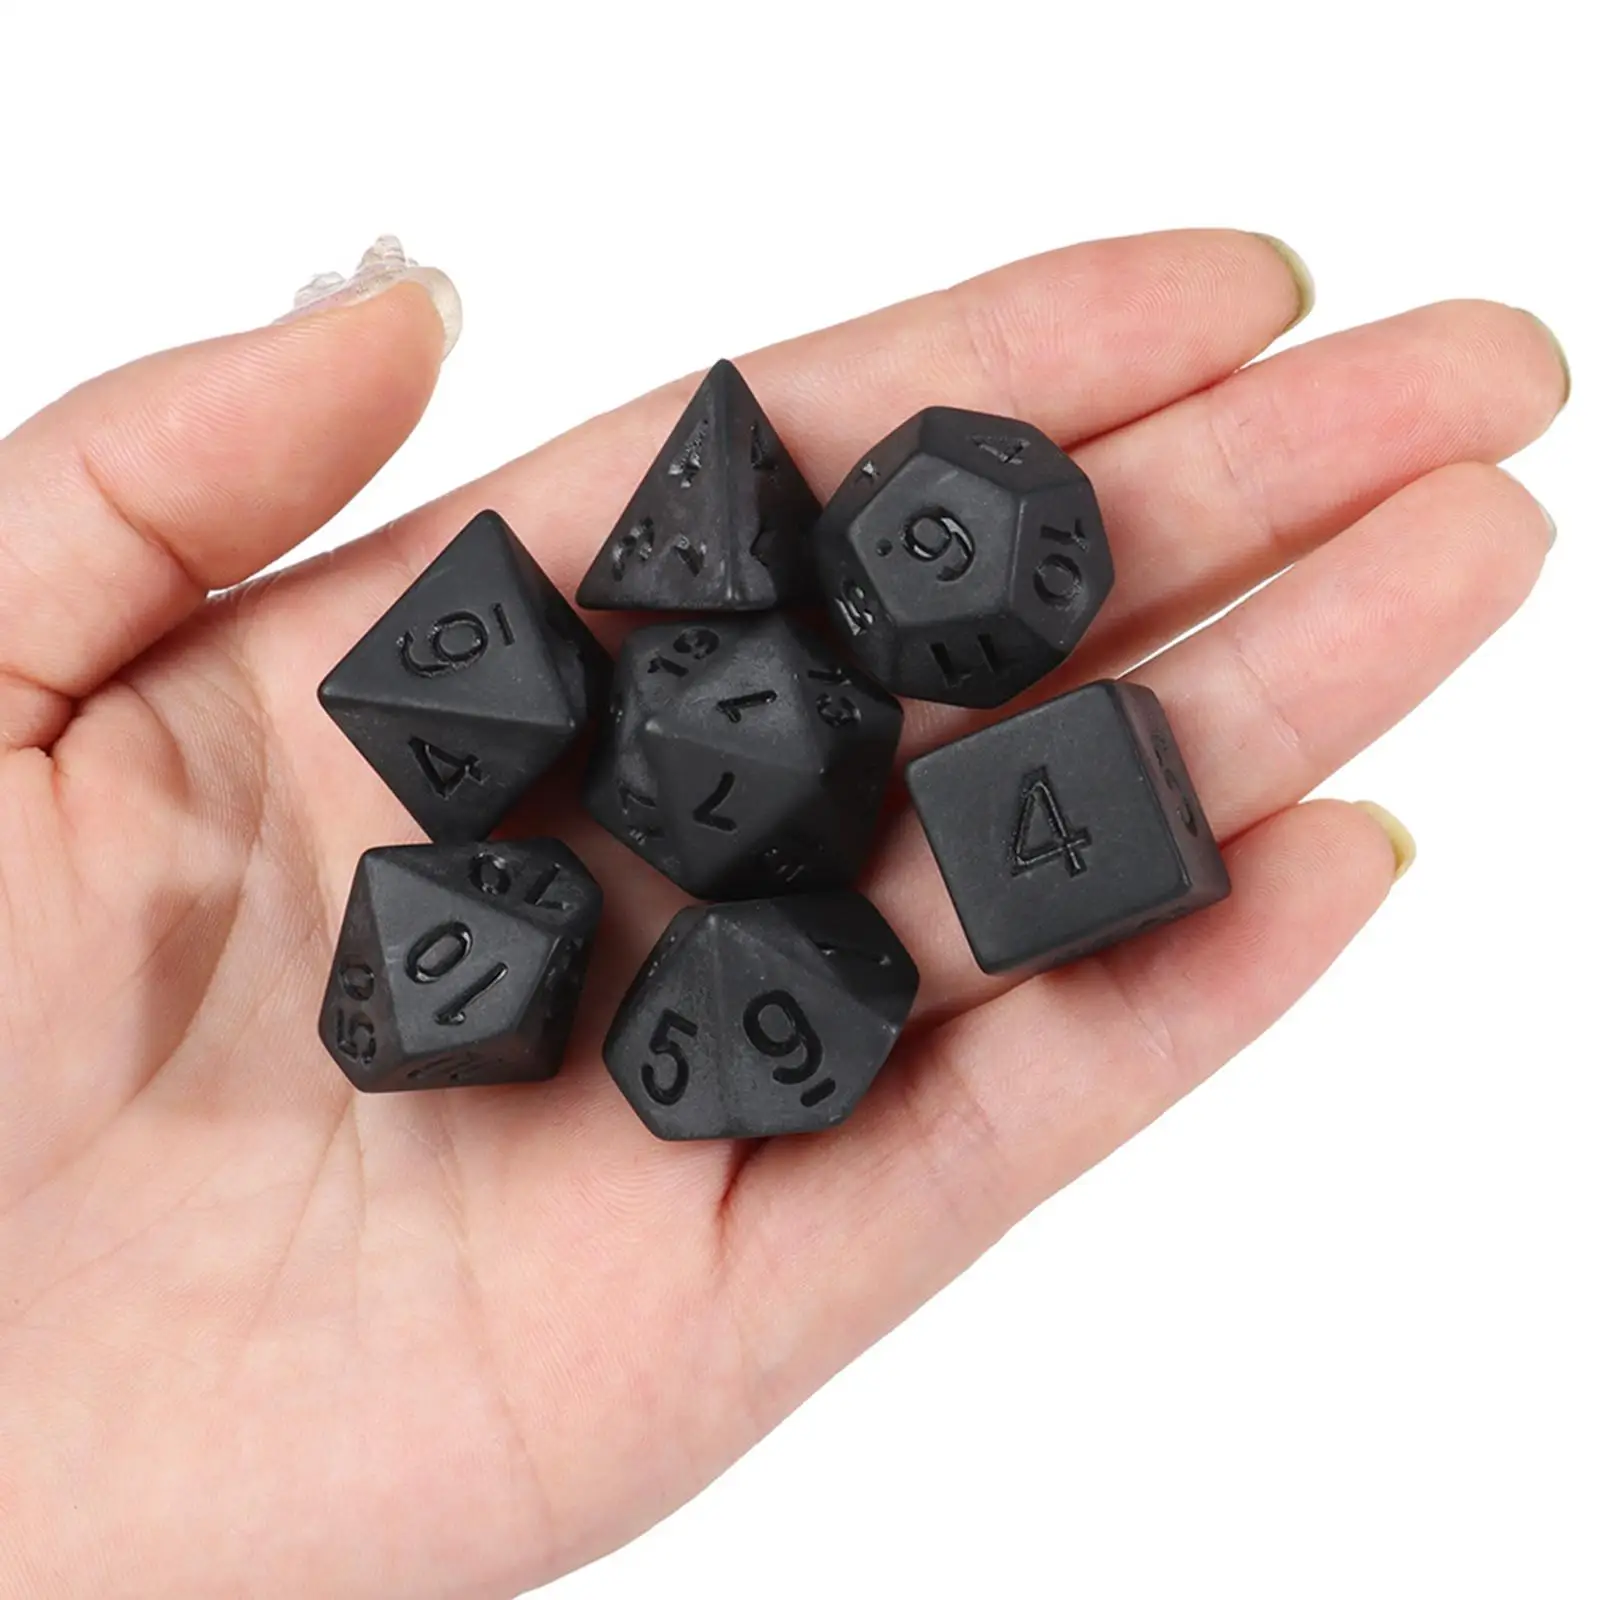 7x Polyhedral Dice black for Drinking Entertainment Party Supplies